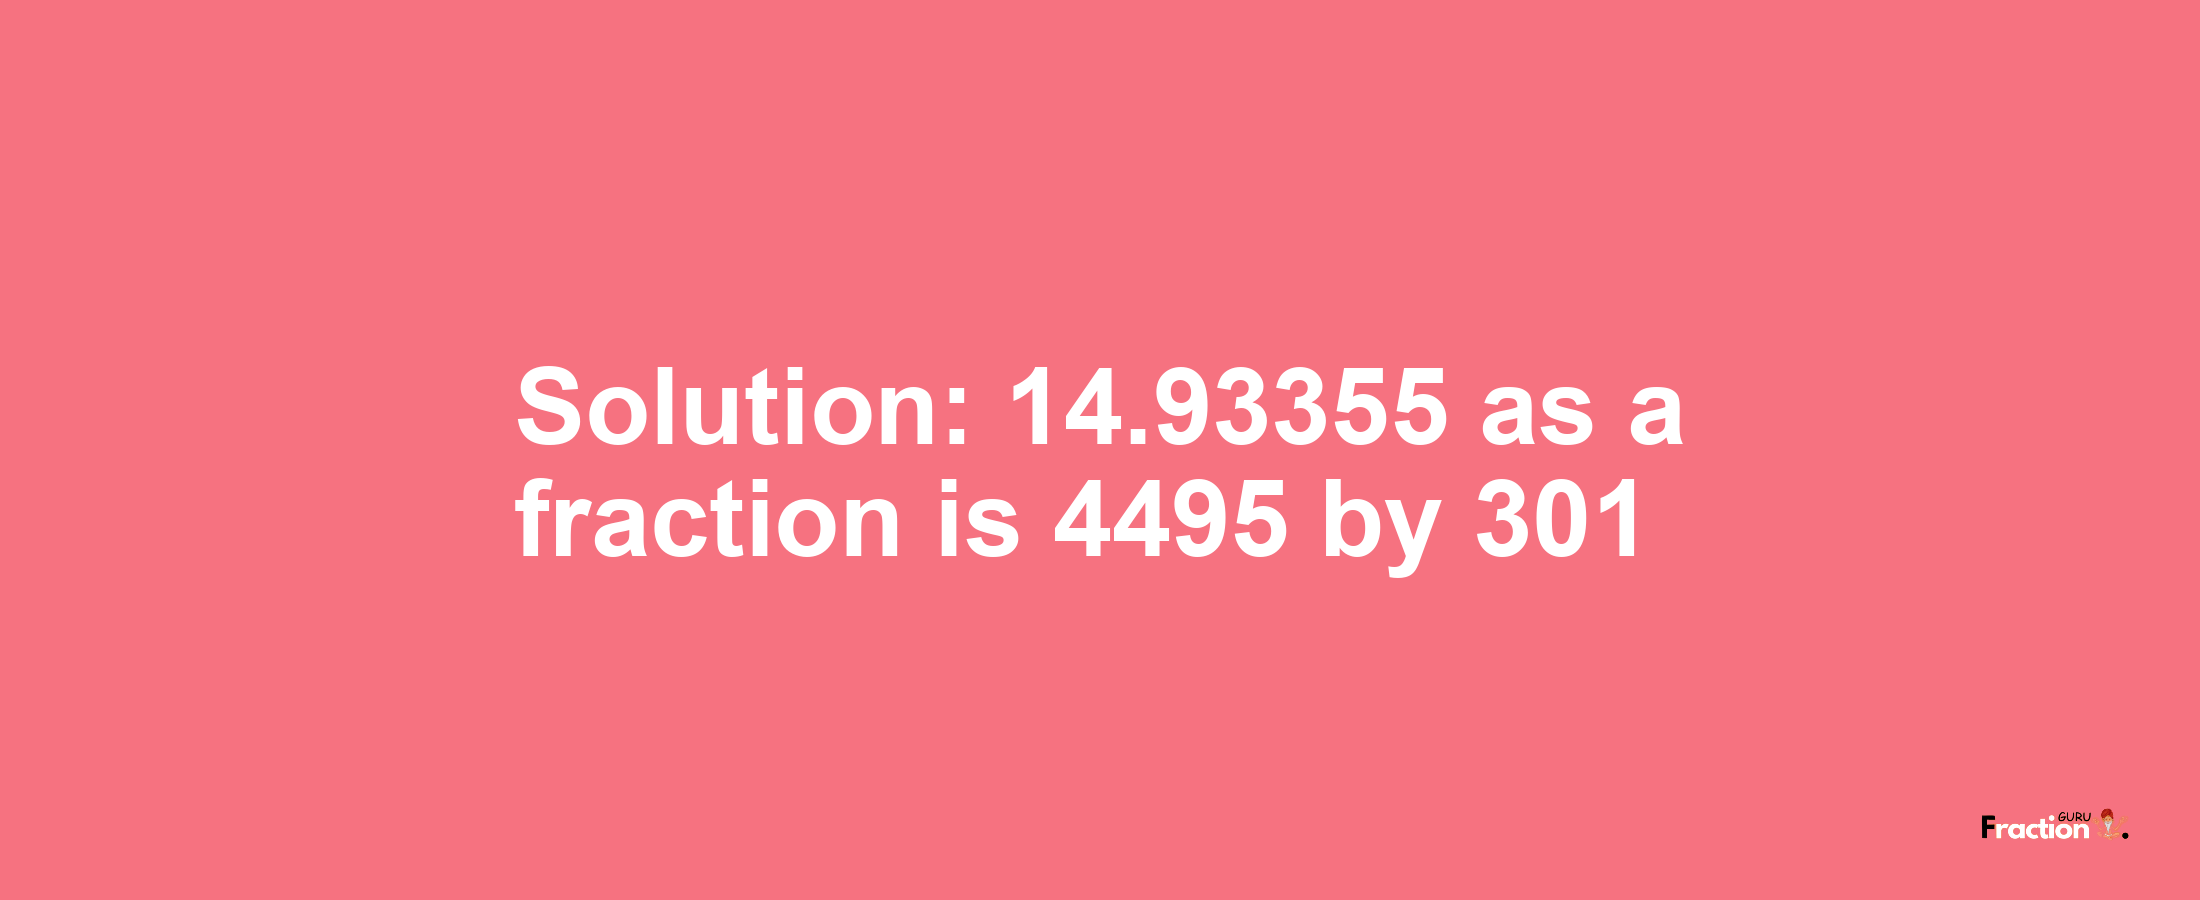 Solution:14.93355 as a fraction is 4495/301